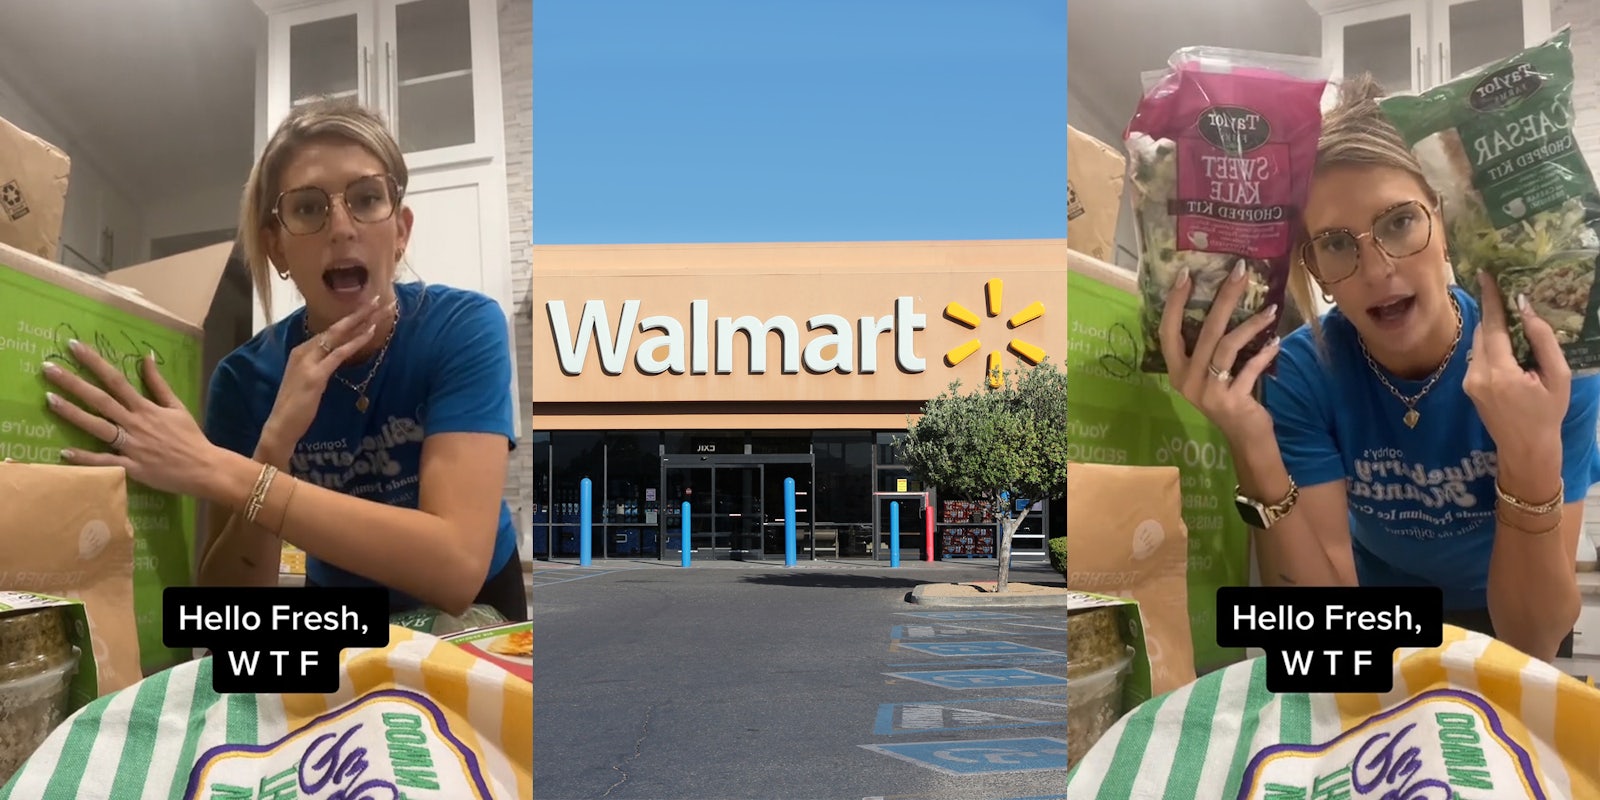 woman speaking with hand on Hello Fresh box with caption 'Hello Fresh, W T F' (l) Walmart building with sign blue sky and parking lot (c) woman speaking holding up Walmart salads next to Hello Fresh box with caption 'Hello Fresh, W T F' (r)